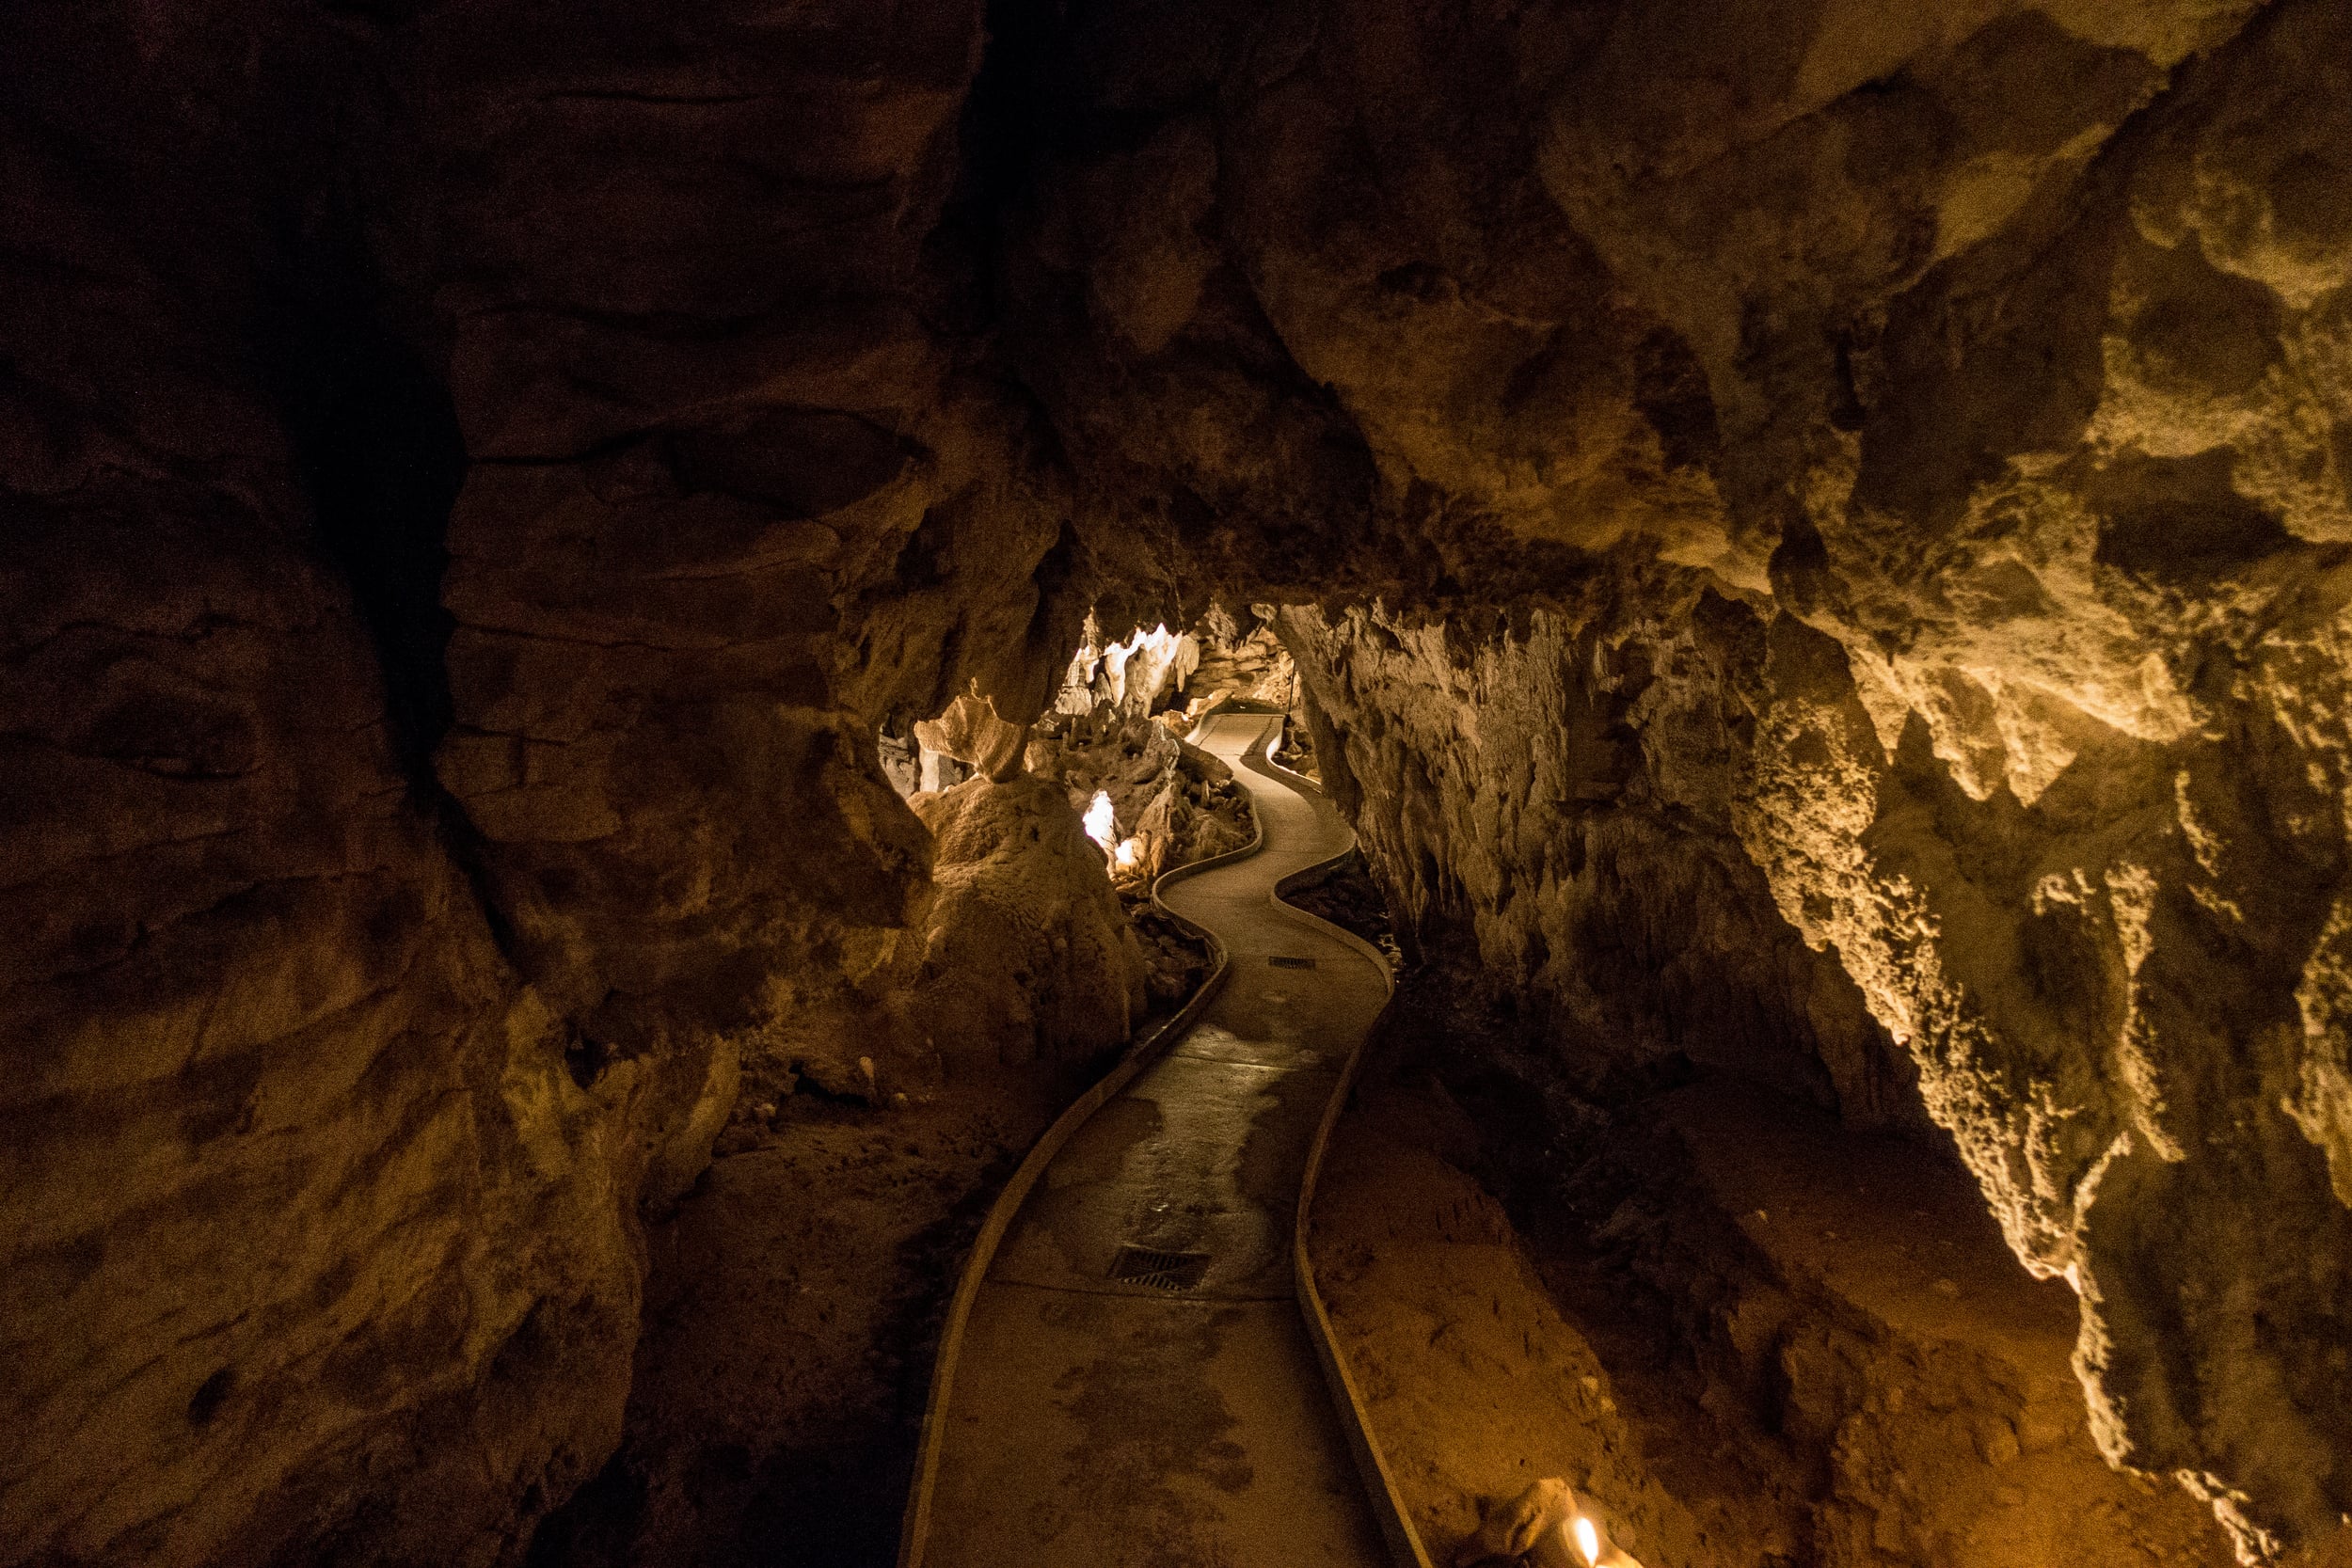  The path through CotS strategically meanders through the cave to protect certain ground formations. 